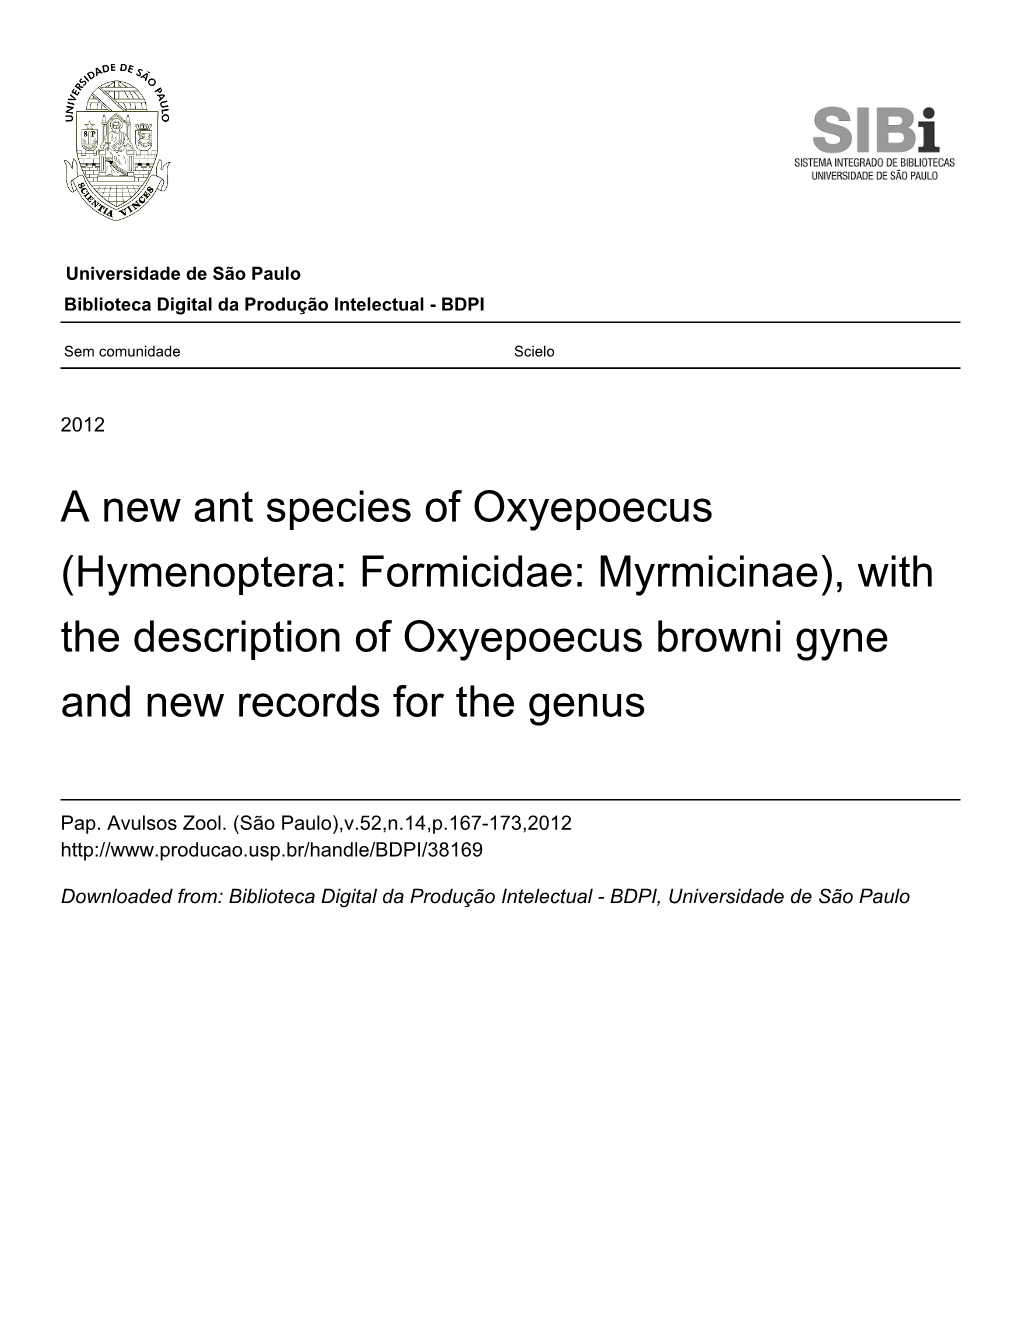 A New Ant Species of Oxyepoecus (Hymenoptera: Formicidae: Myrmicinae), with the Description of Oxyepoecus Browni Gyne and New Records for the Genus